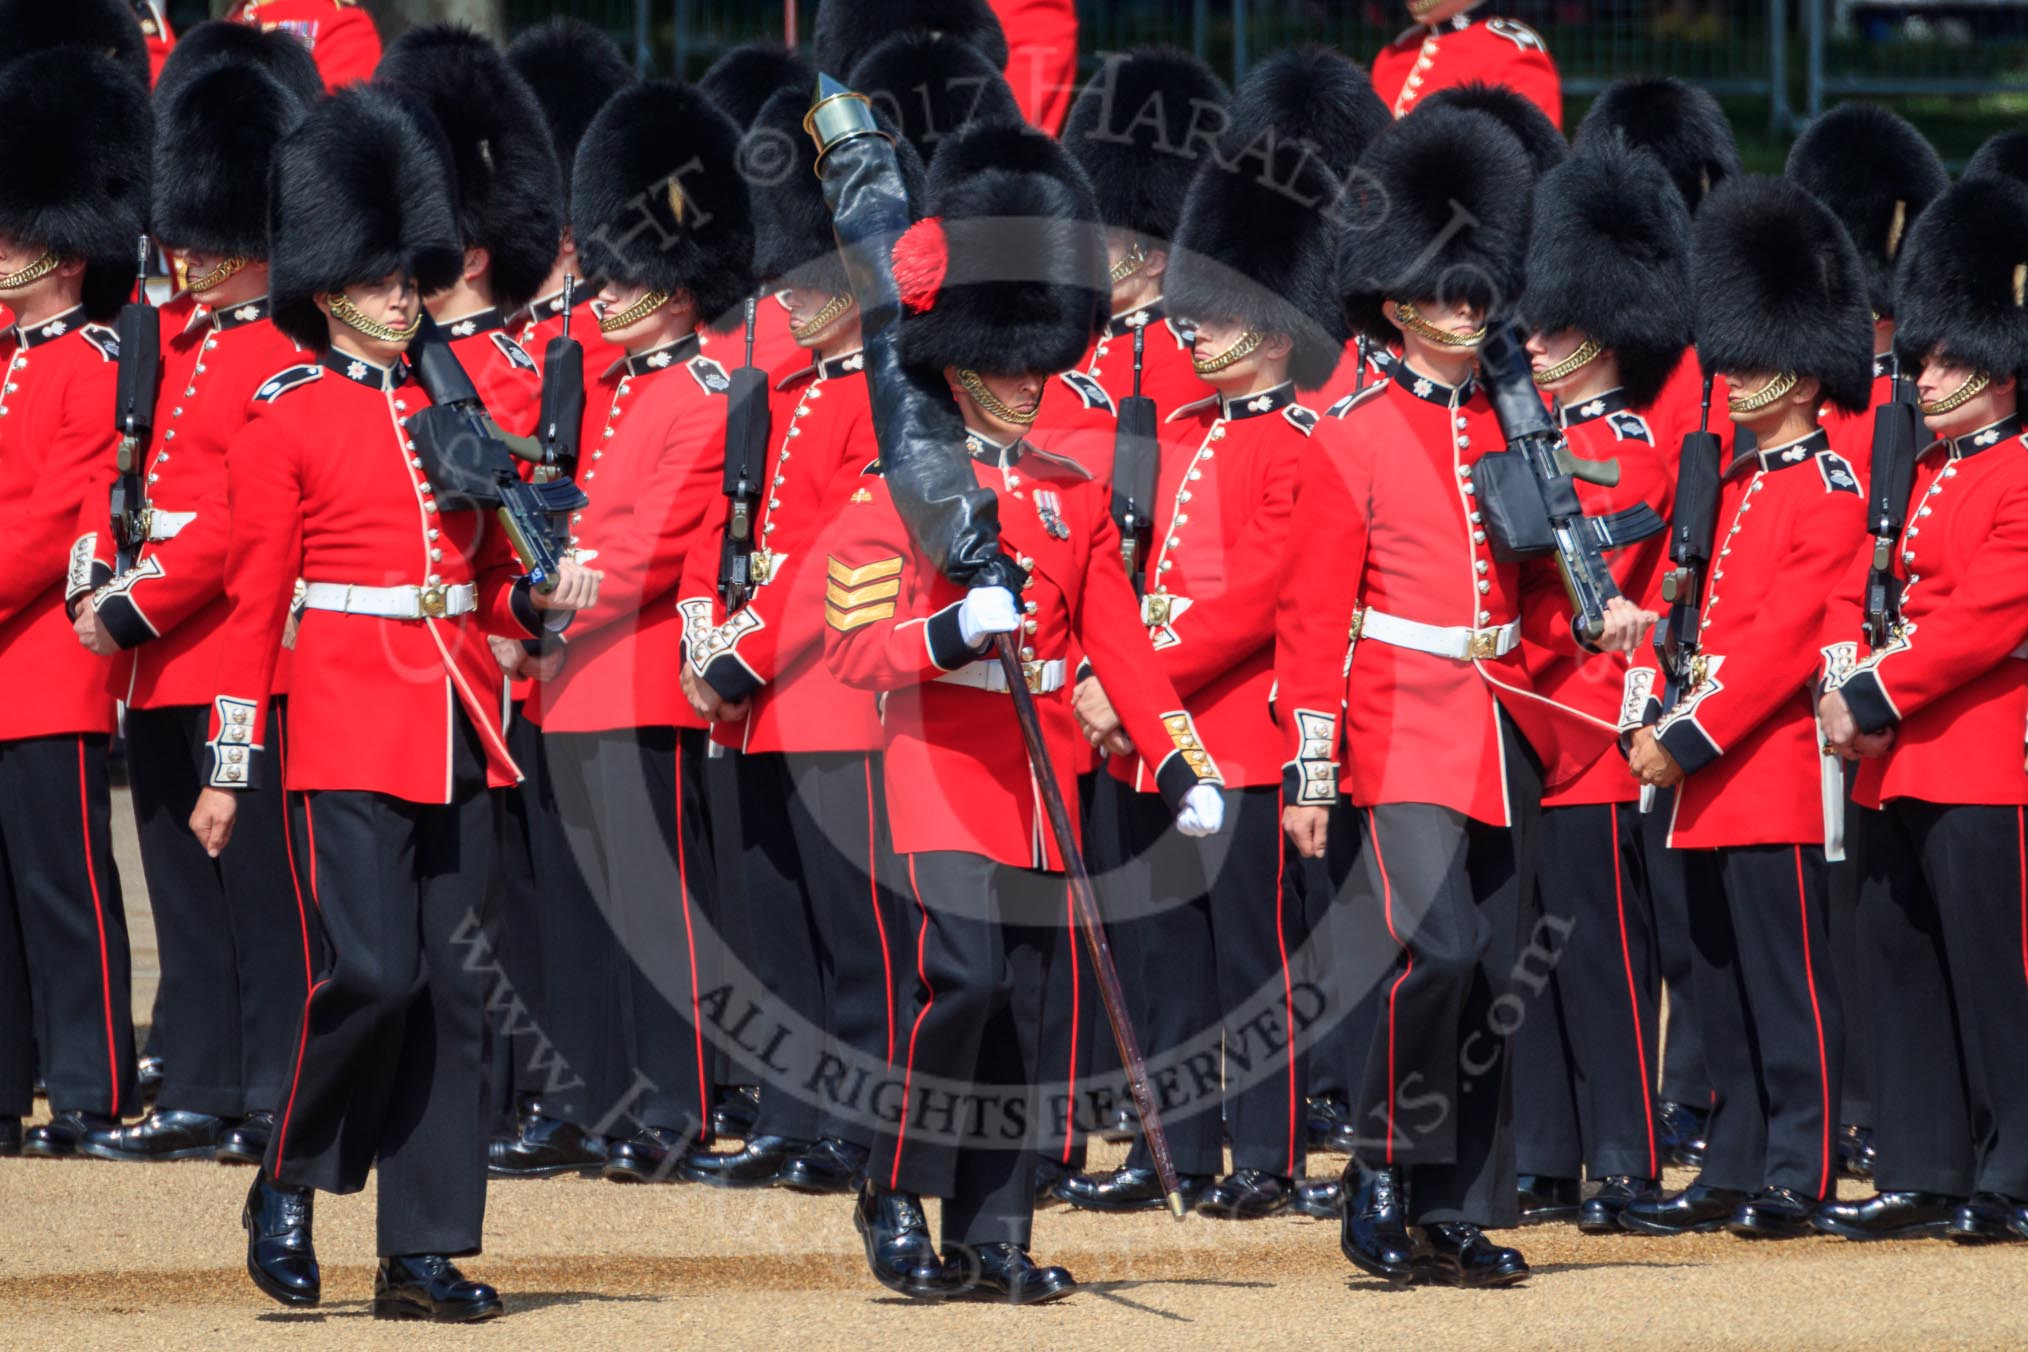 The Colour Party, Colour Sentry Guardsman Jonathon Hughes (26), Colour Sergeant Sam McAuley (31), and Colour Sentry Guardsman Sean Cunningham (21) marching towards their position on Horse Guards Parade during Trooping the Colour 2018, The Queen's Birthday Parade at Horse Guards Parade, Westminster, London, 9 June 2018, 10:31.